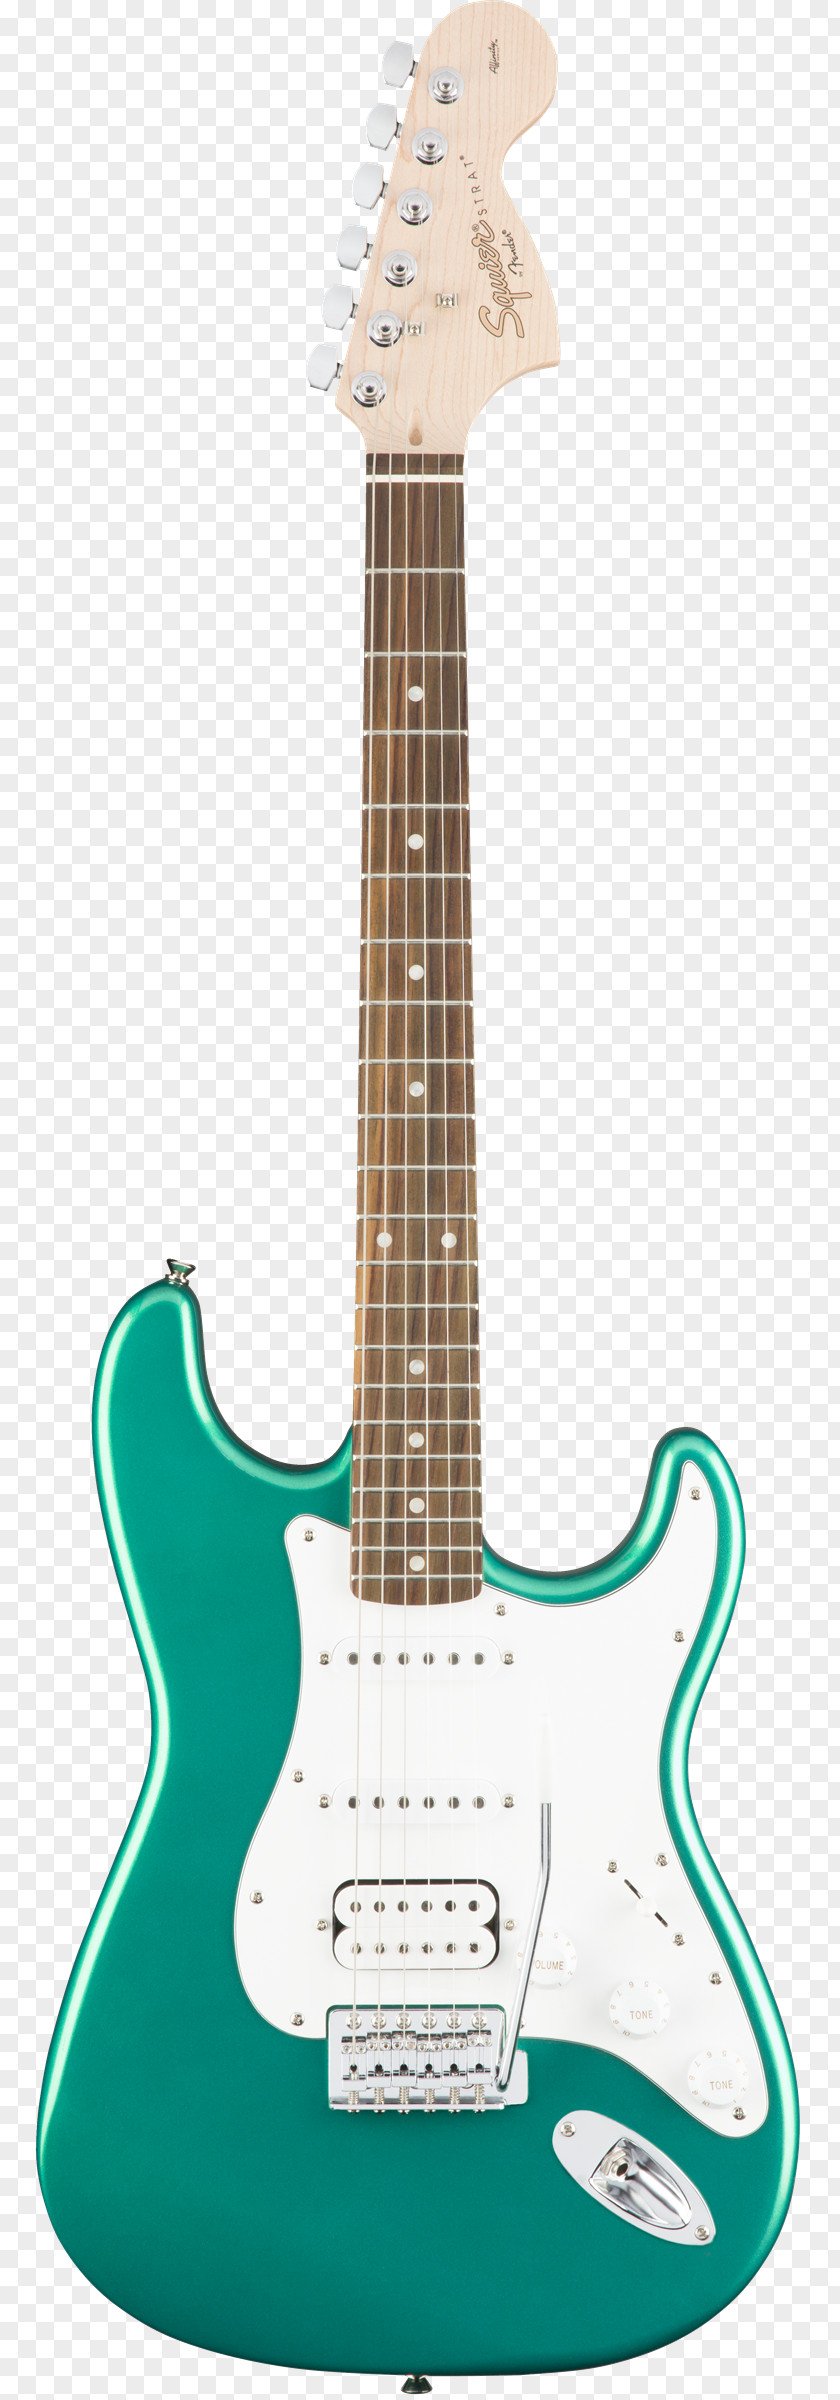 Electric Guitar Fender Stratocaster Squier Musical Instruments Corporation Fingerboard PNG